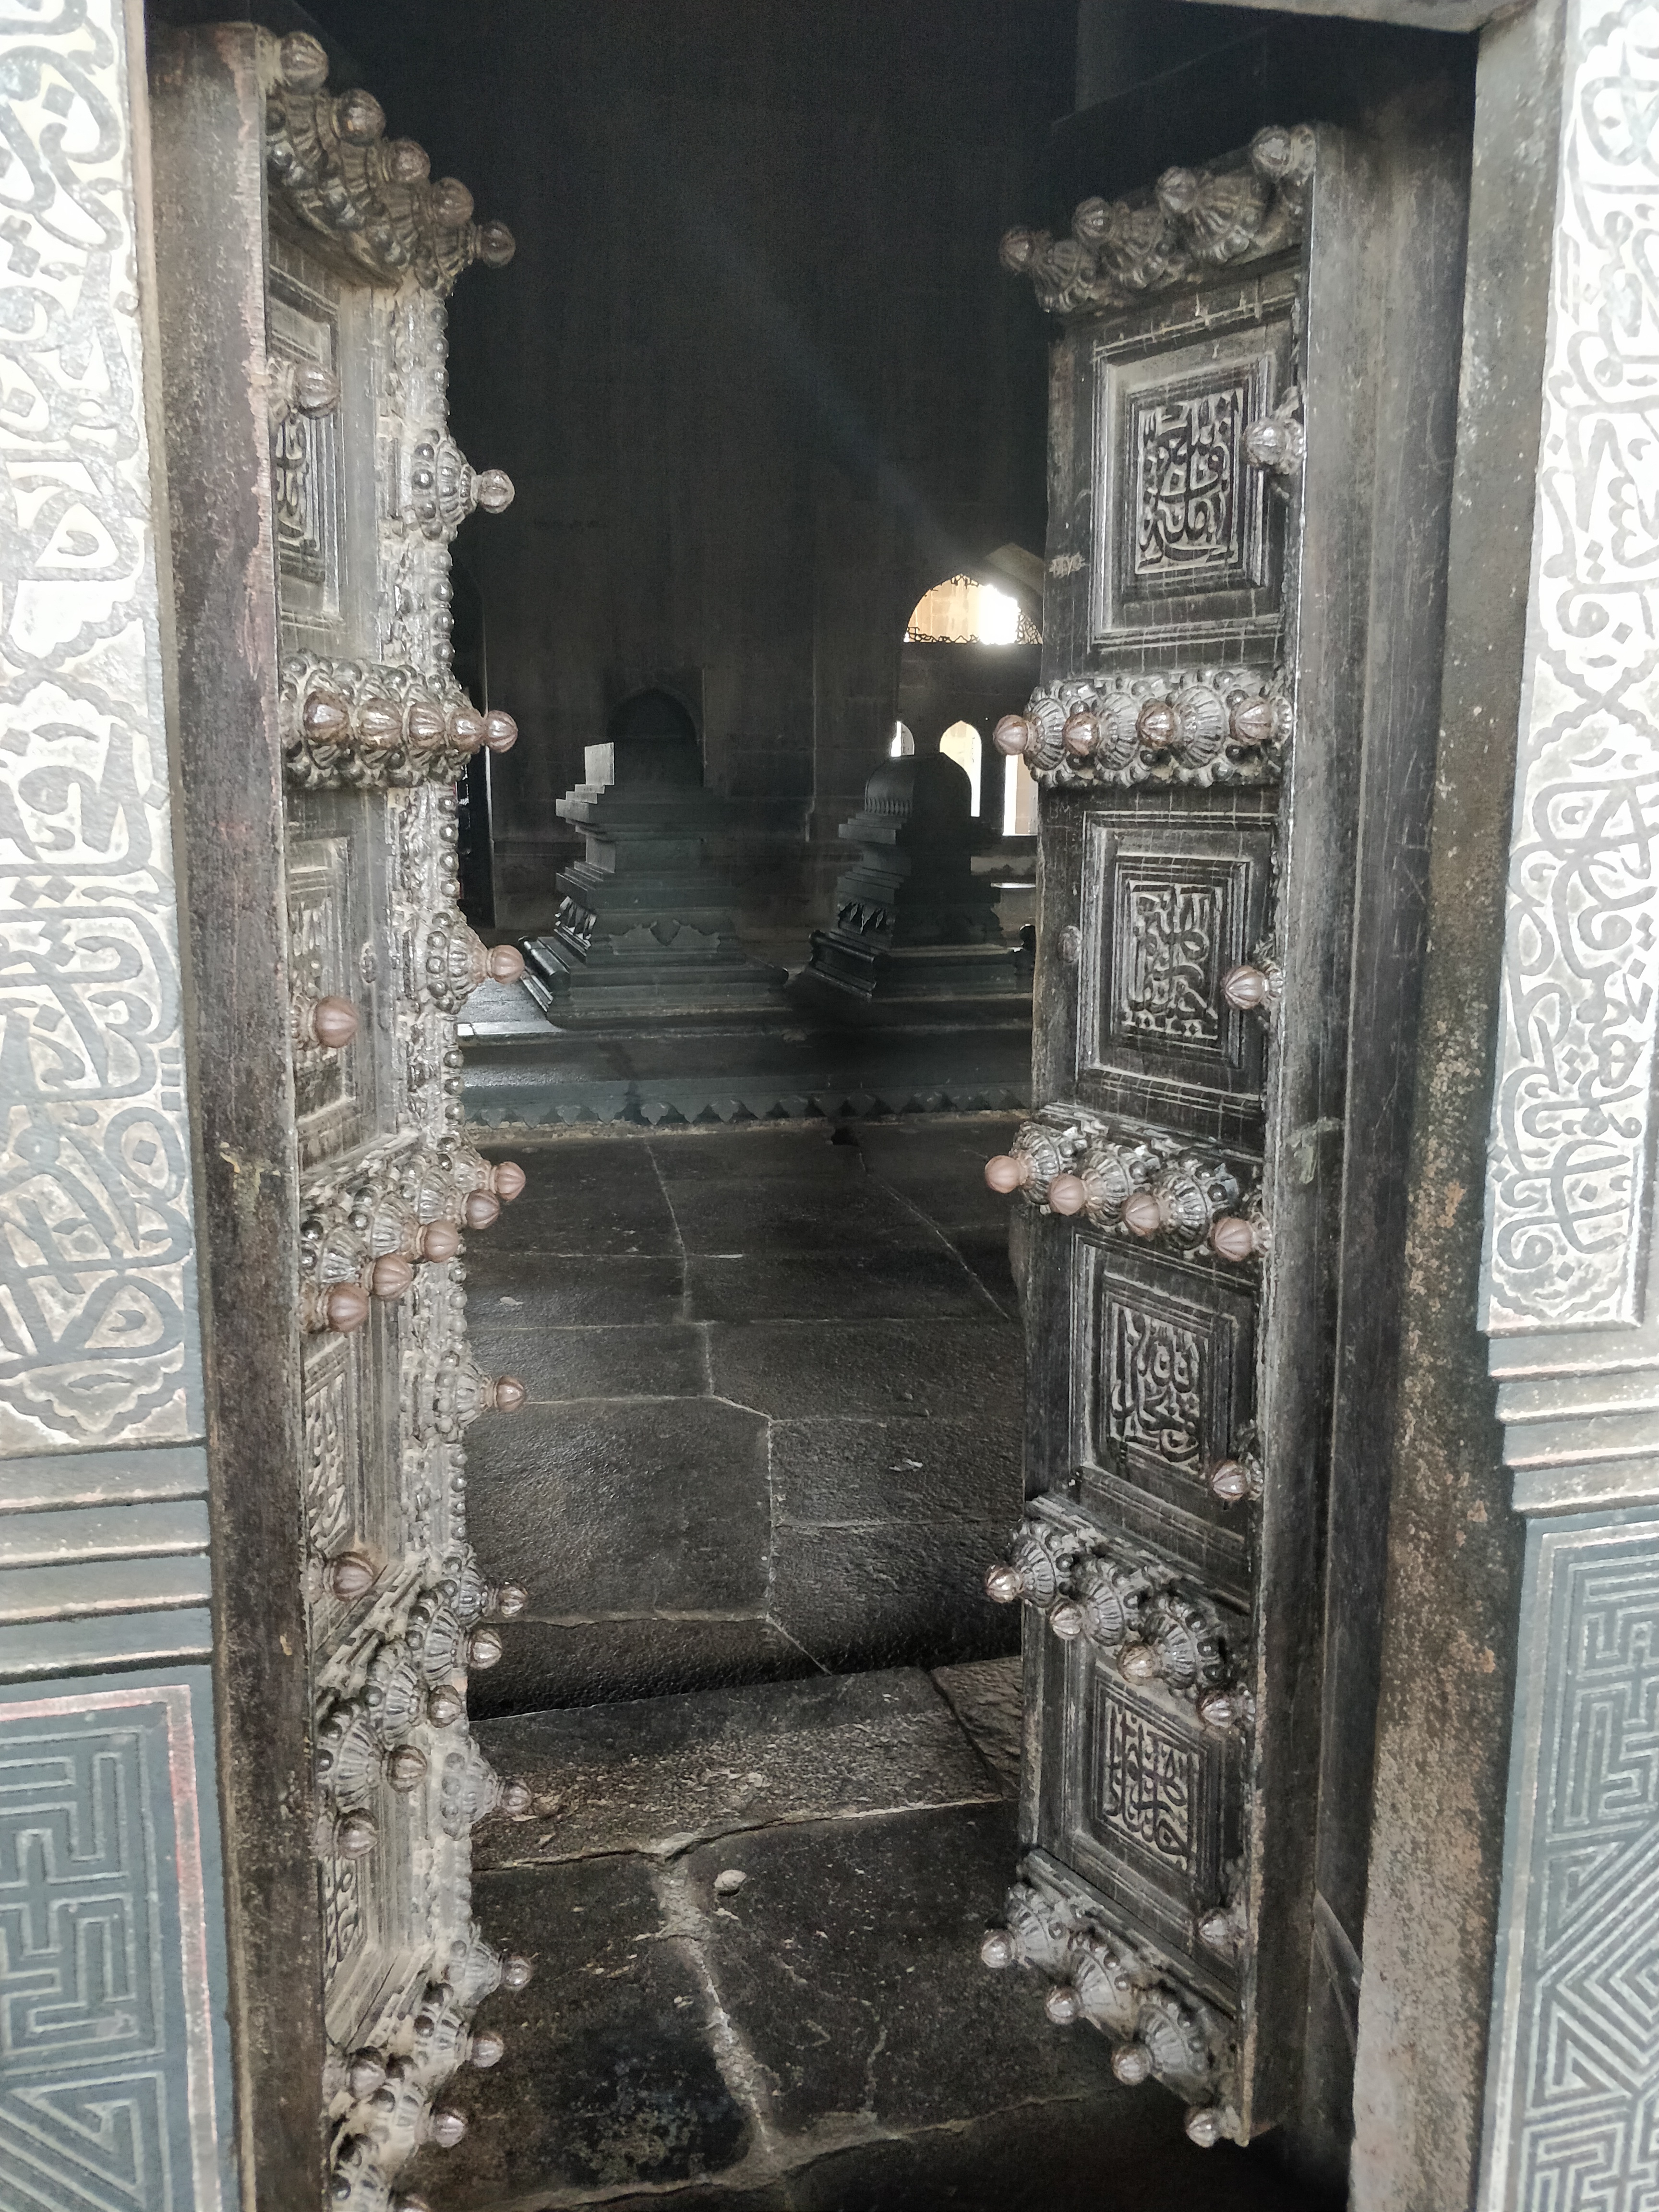 beautiful designs on the doors of the tomb